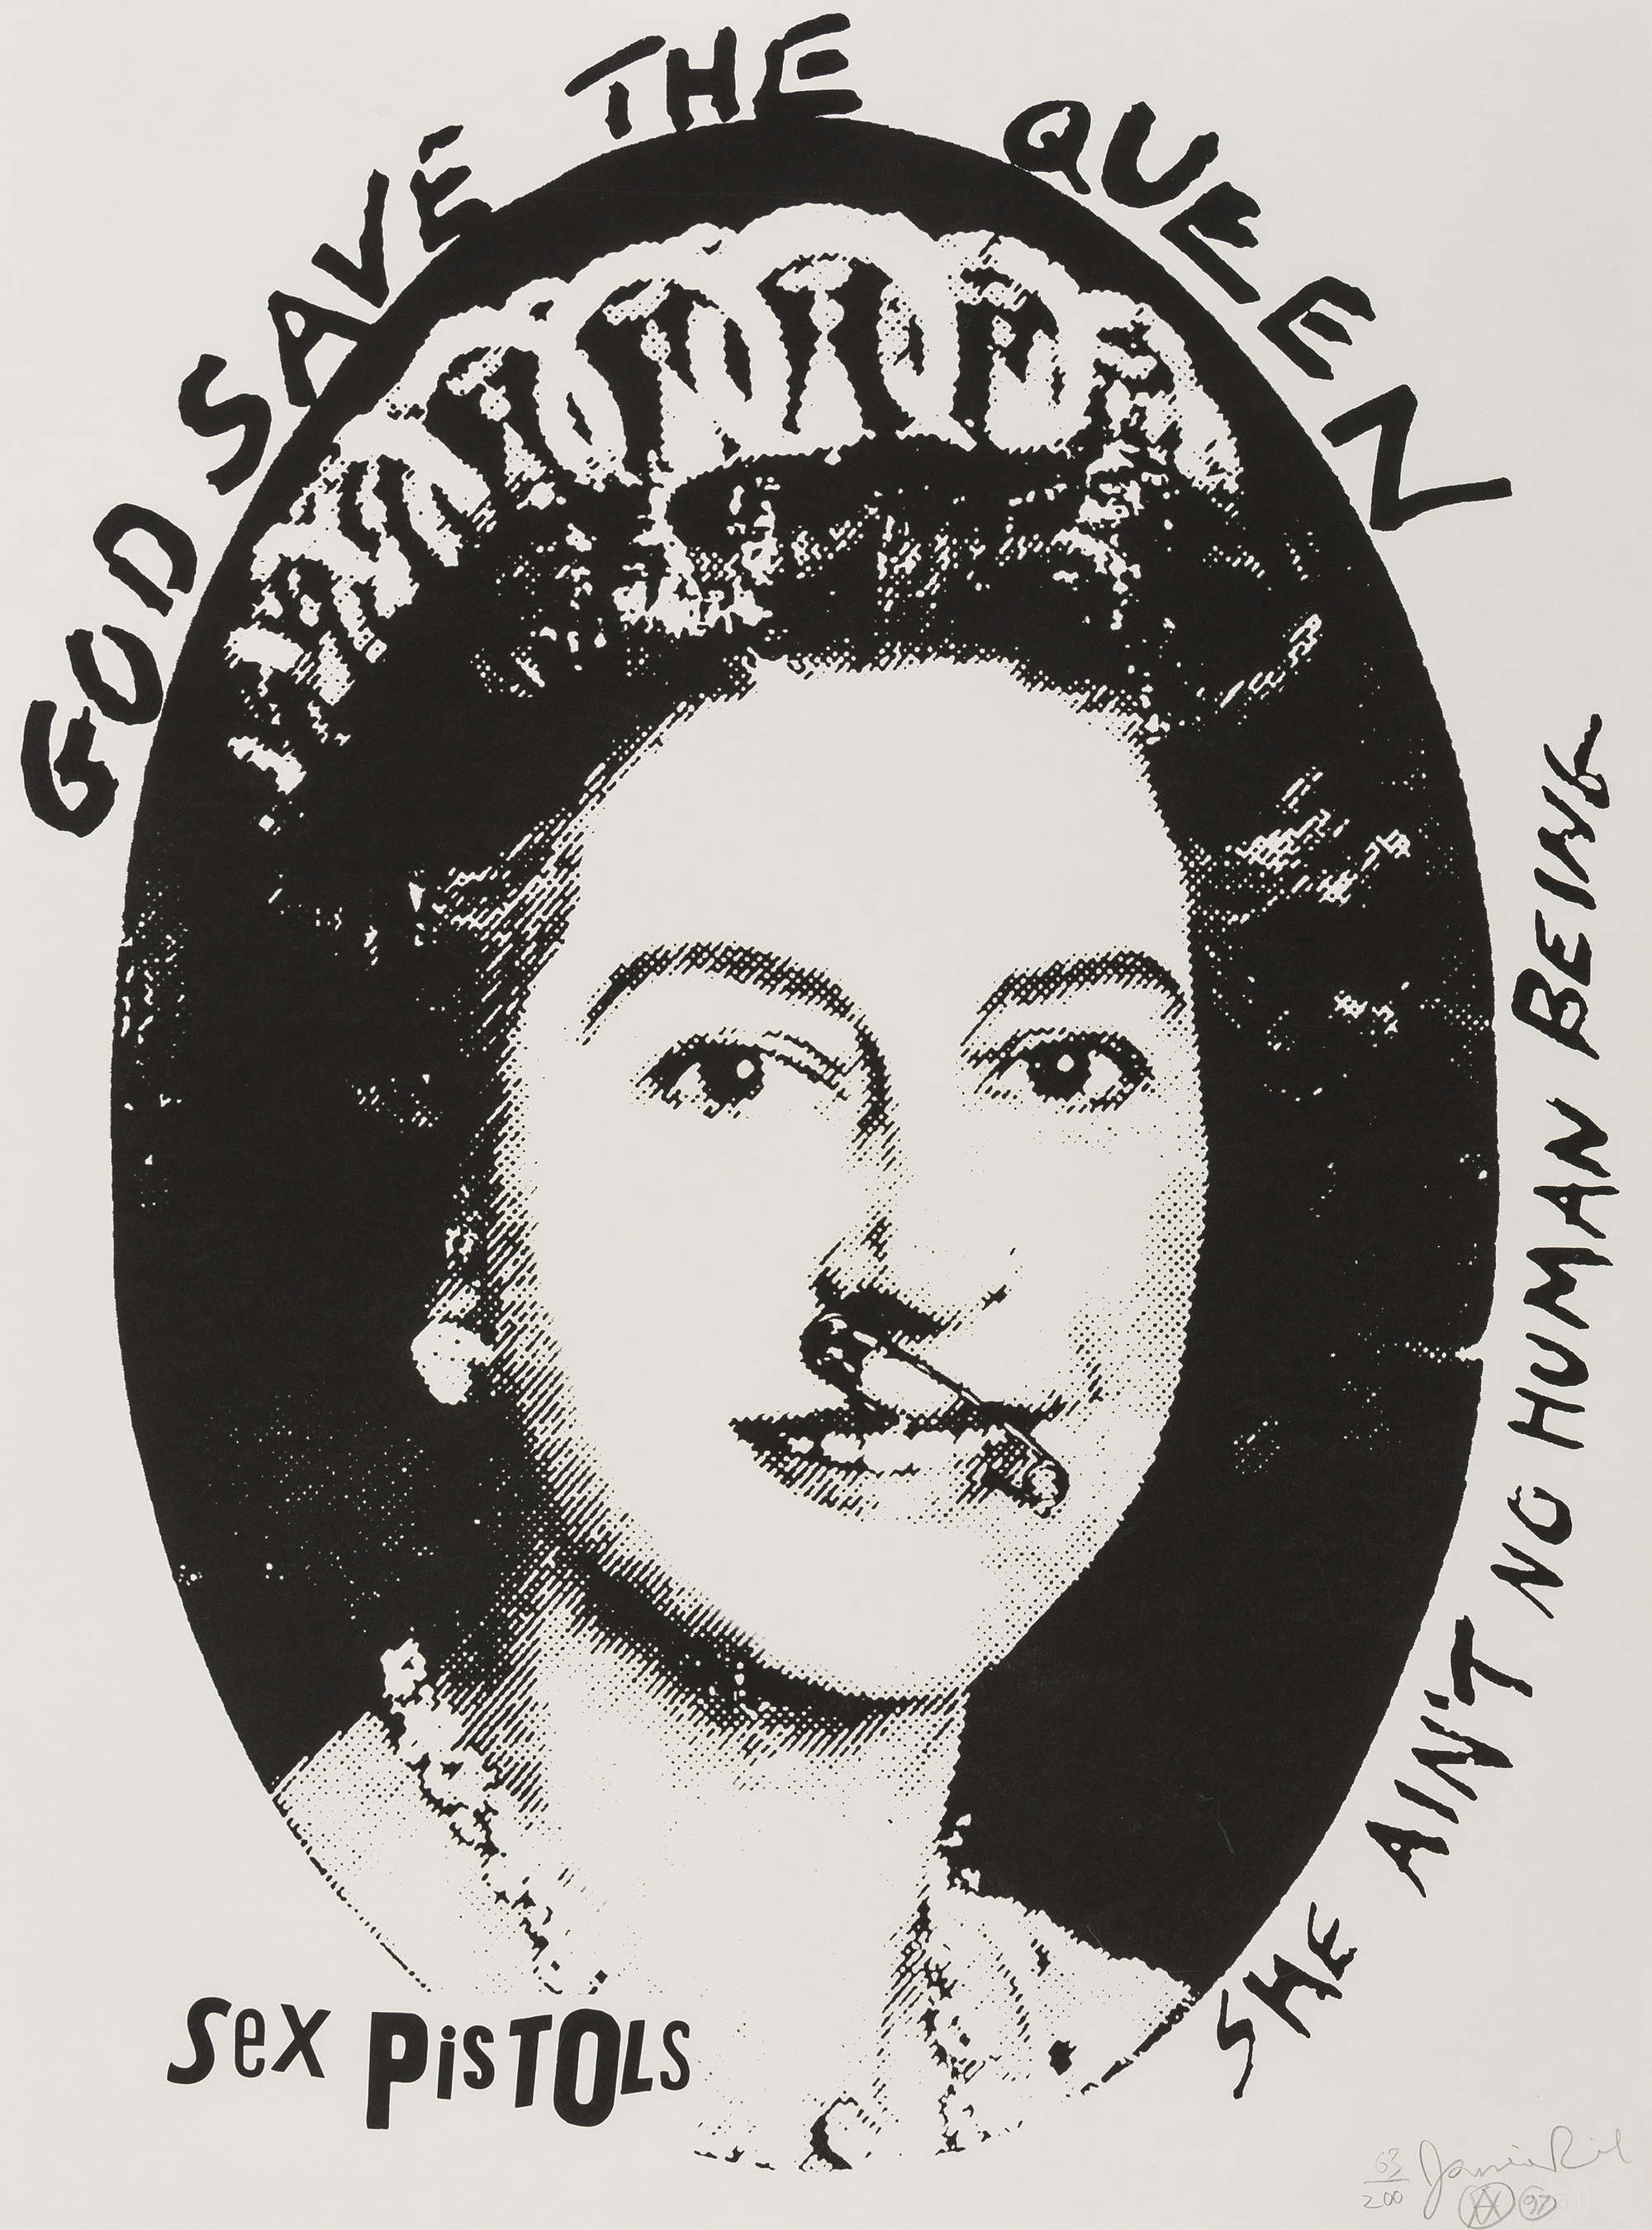 God Save the Queen by Jamie Reid, 1997